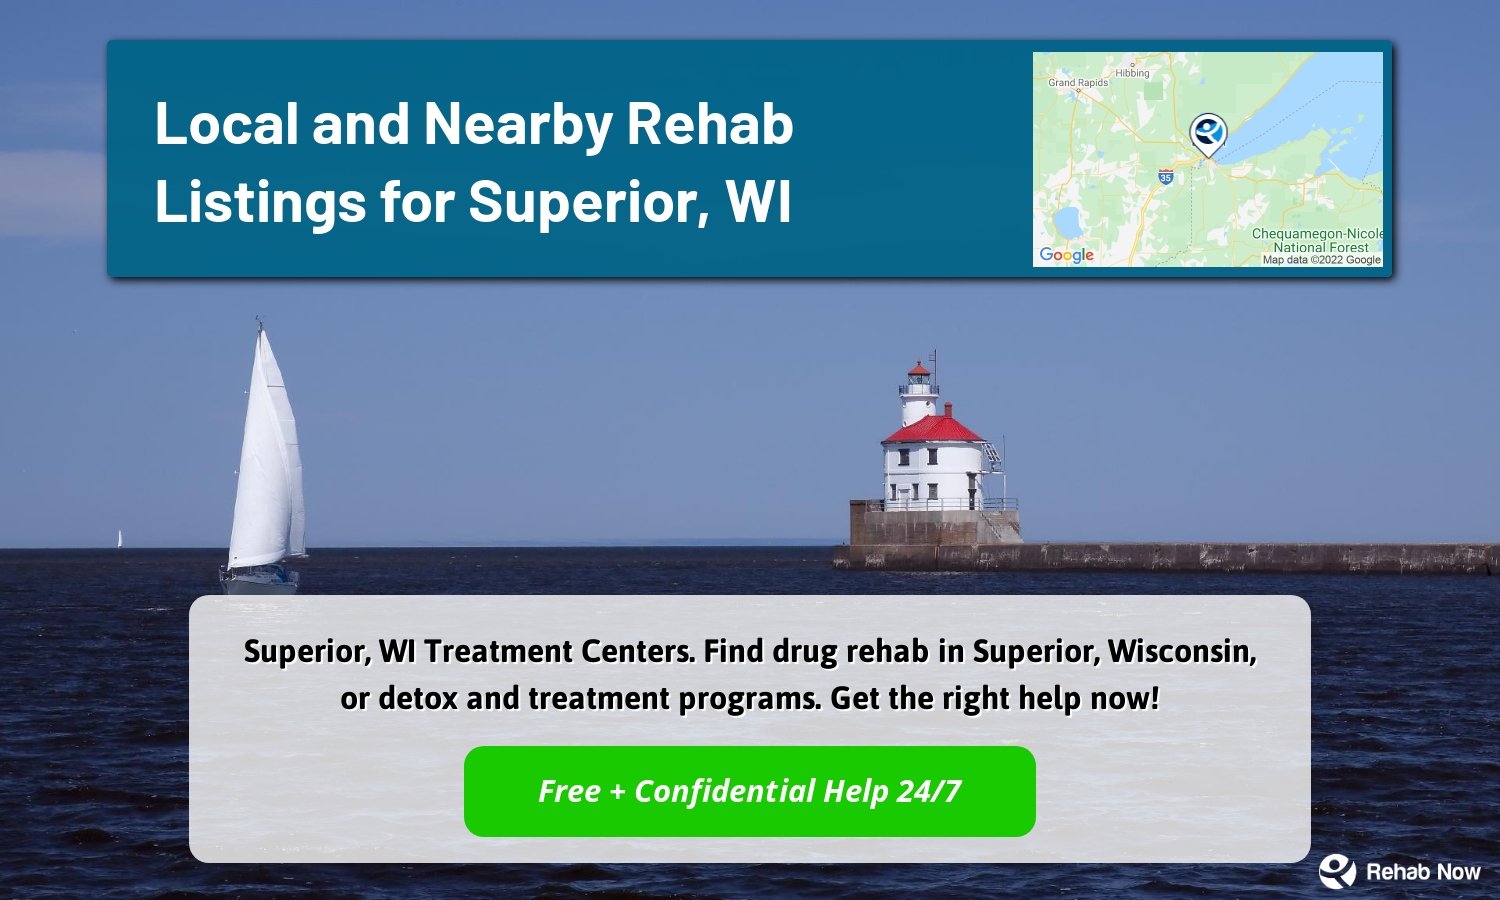 Superior, WI Treatment Centers. Find drug rehab in Superior, Wisconsin, or detox and treatment programs. Get the right help now!